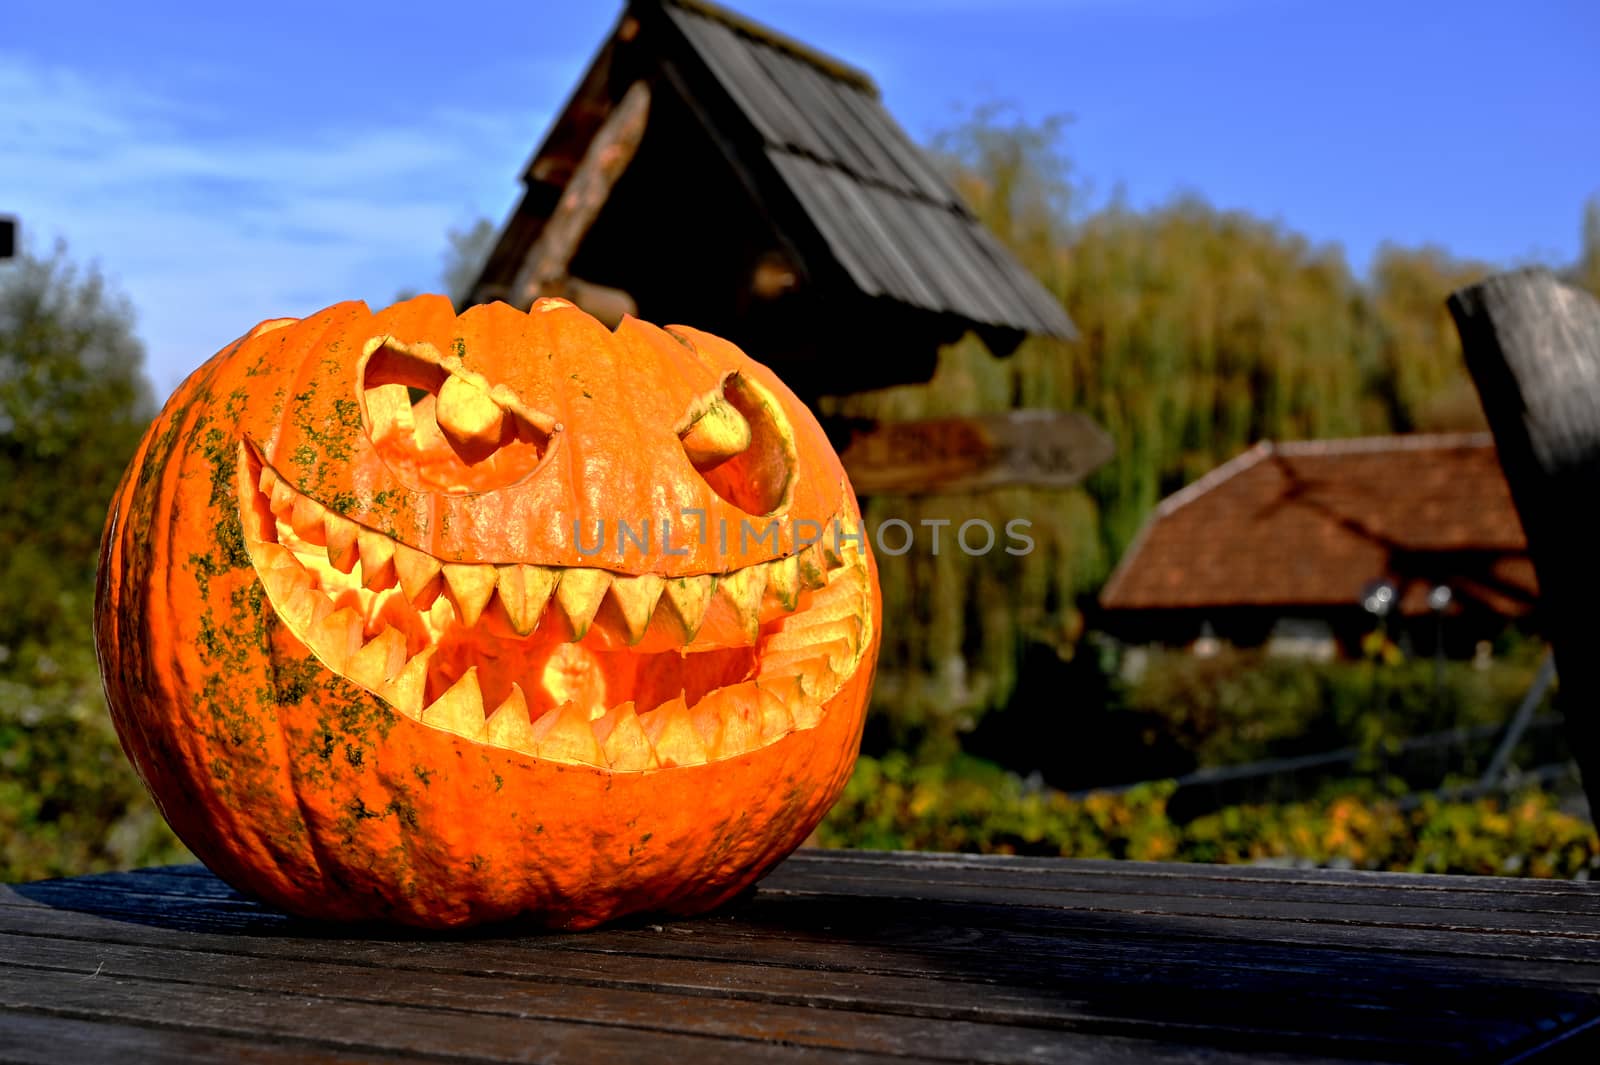 Halloween pumpkin on wood in a spooky village in the middle of day